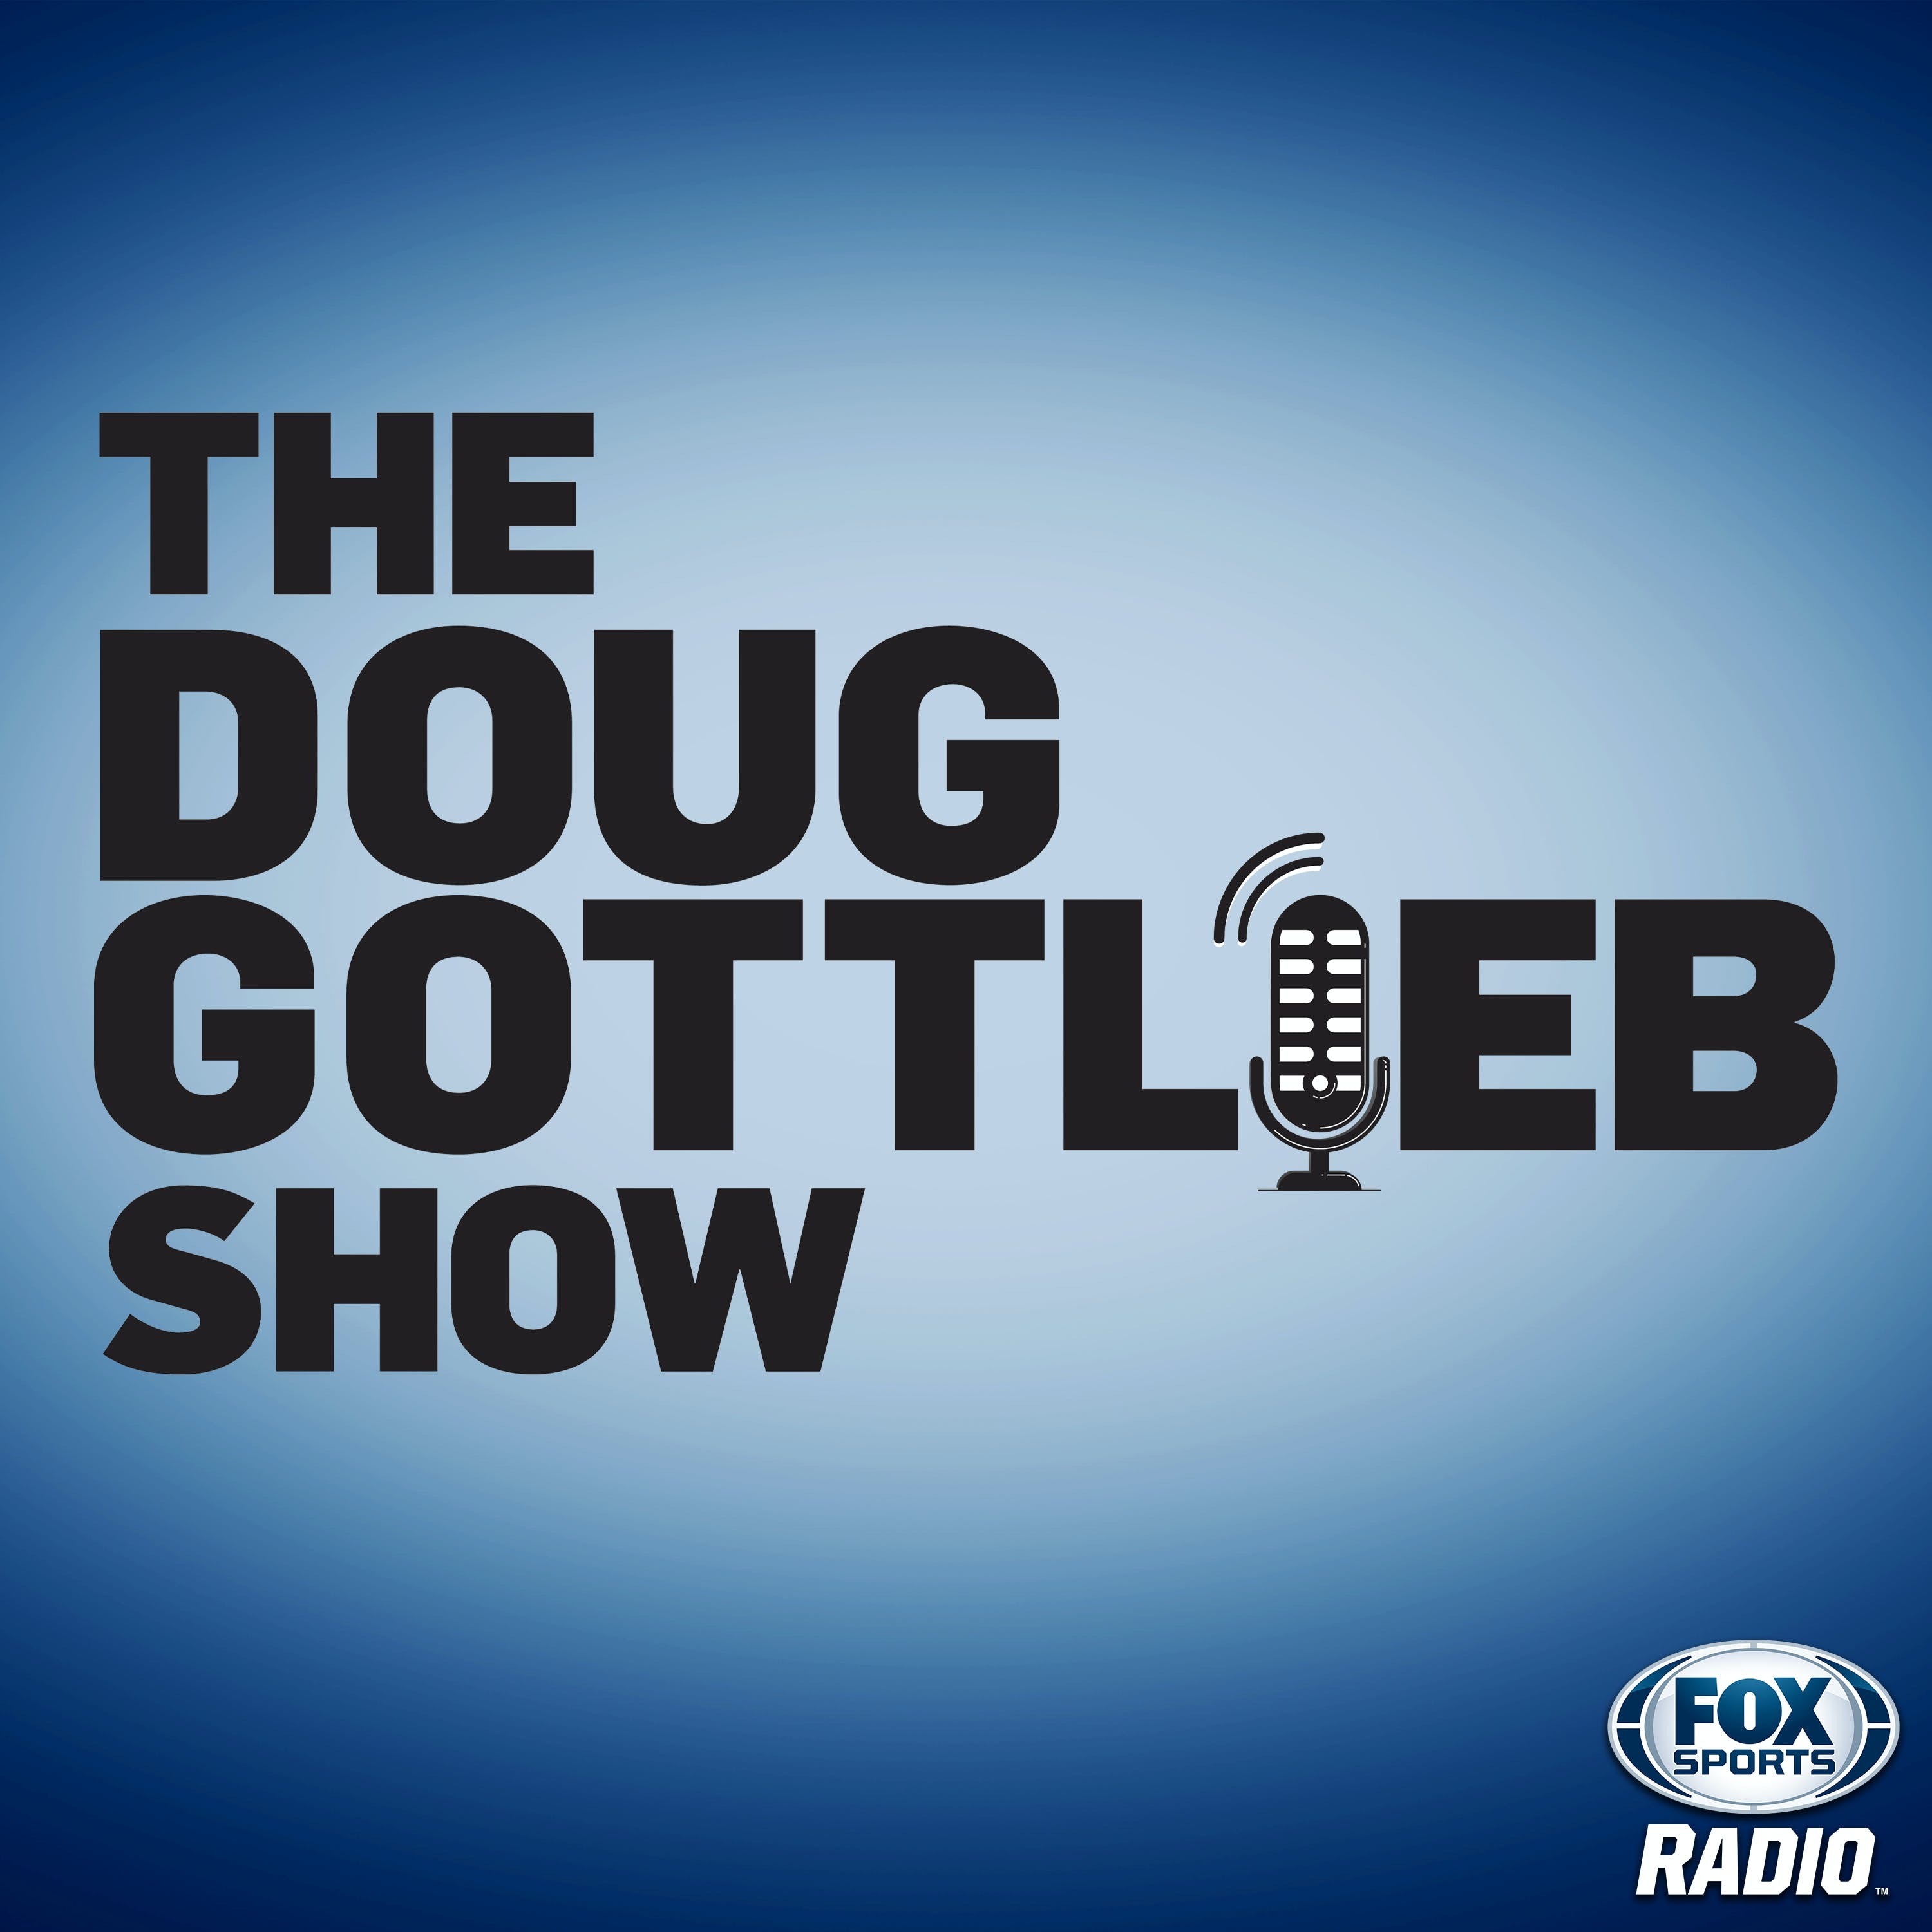 THE BEST OF THE WEEK OF THE DOUG GOTTLIEB SHOW